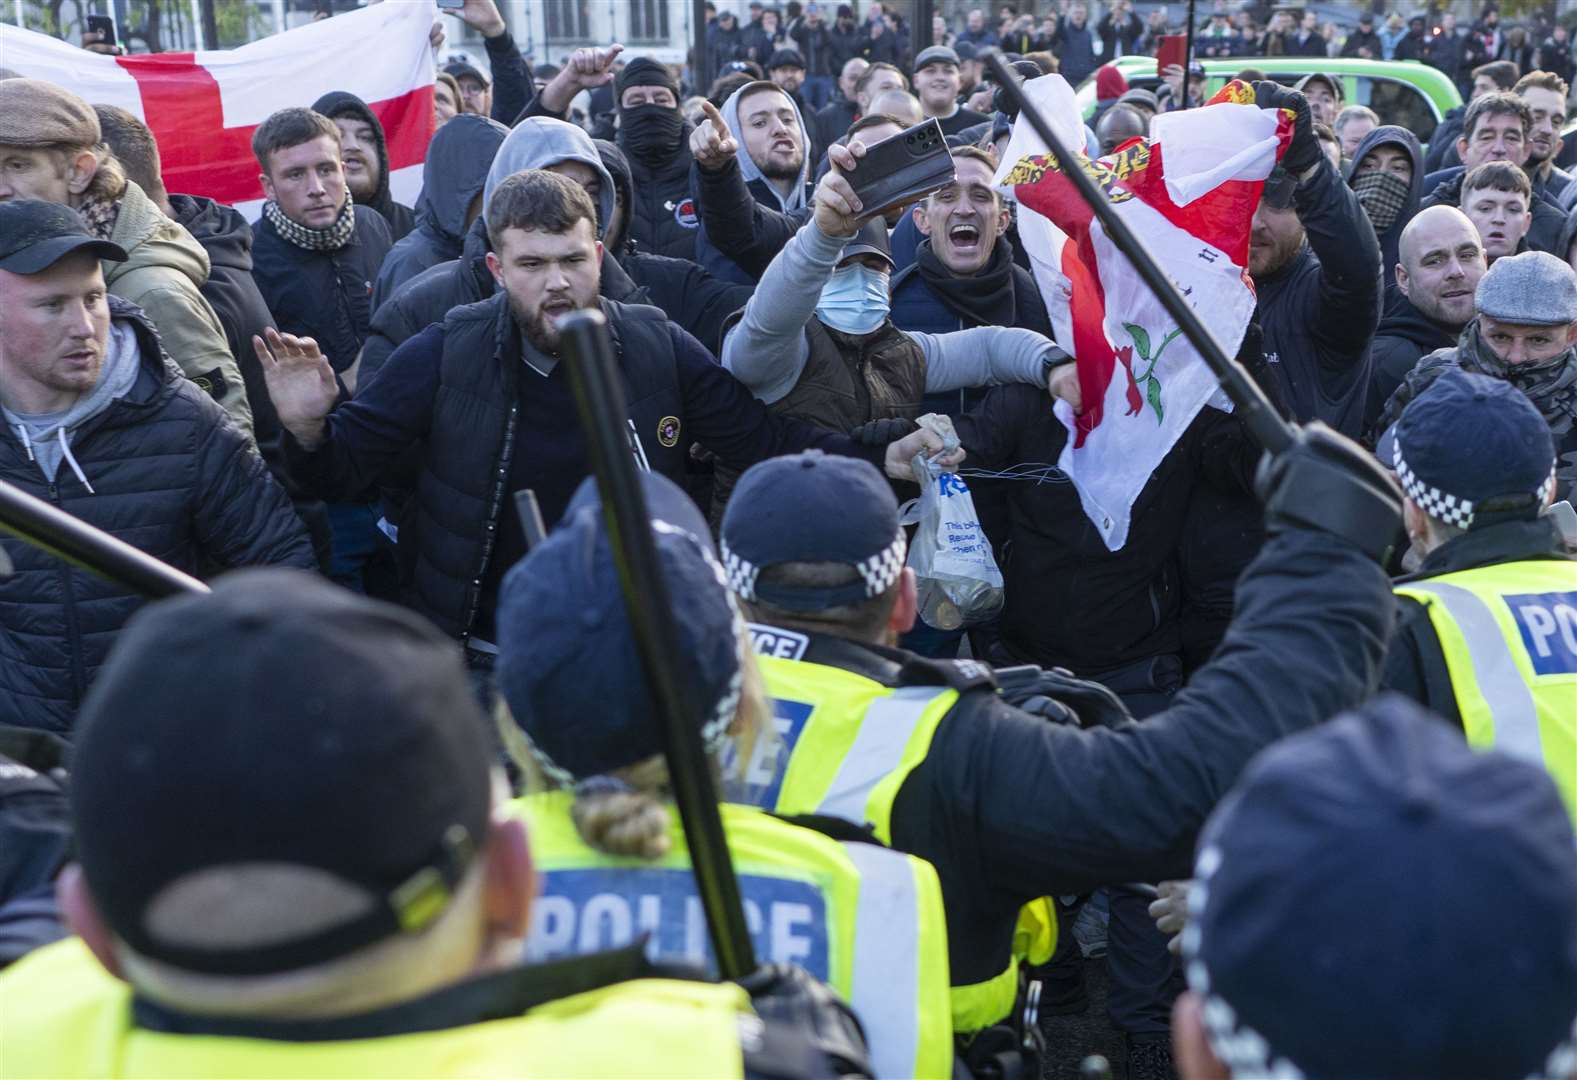 Counter-protesters confront police in Parliament Square (Jeff Moore/PA)